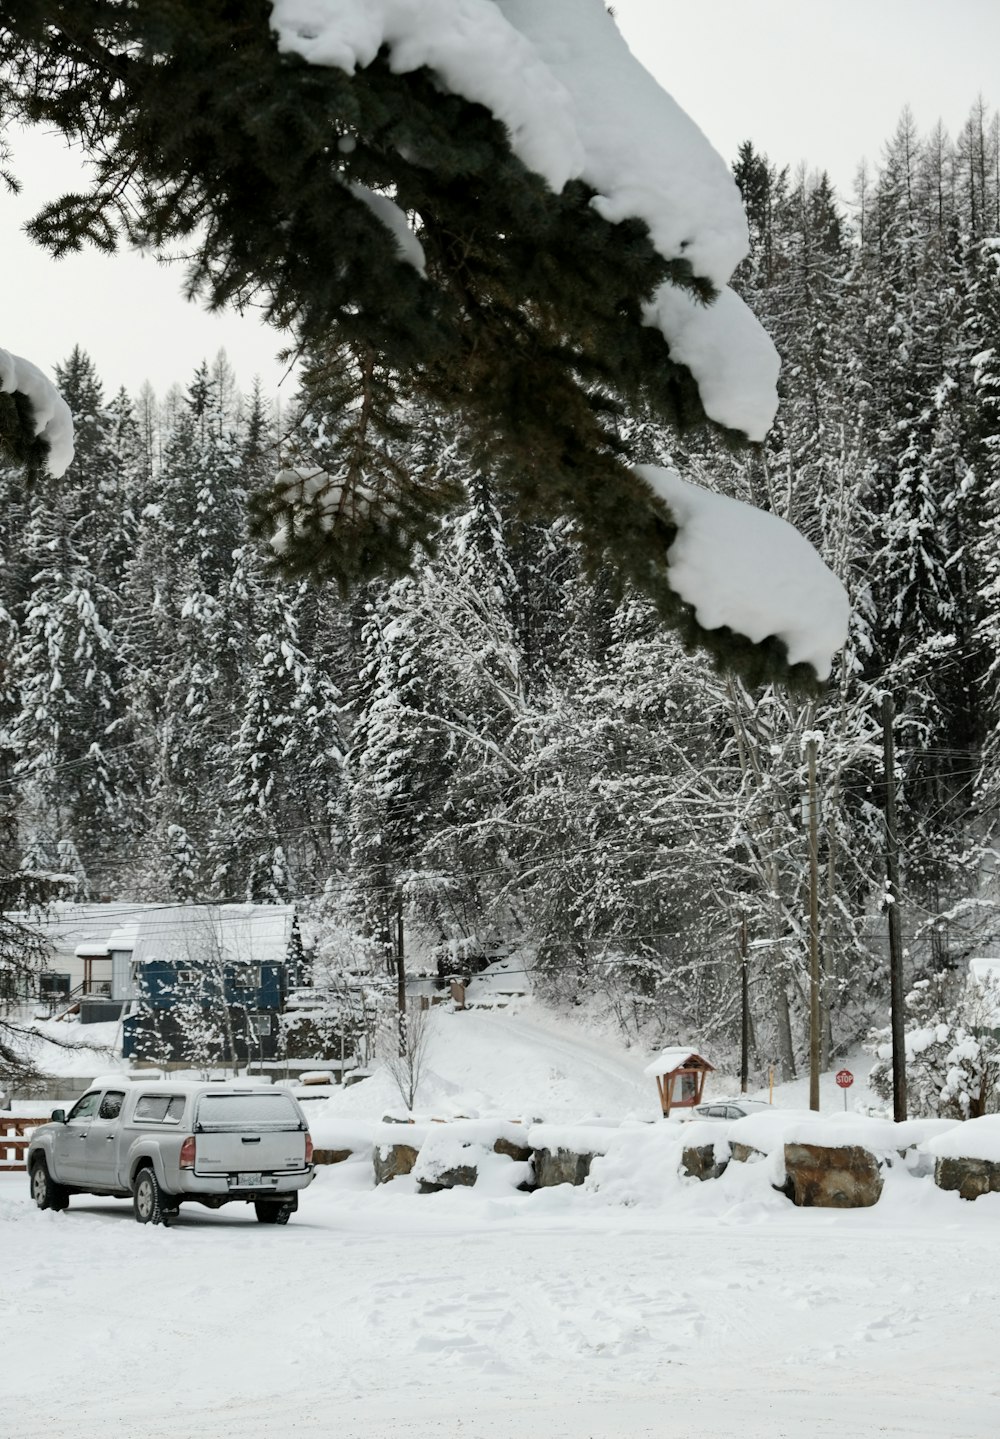 a truck is parked in the snow near a pine tree